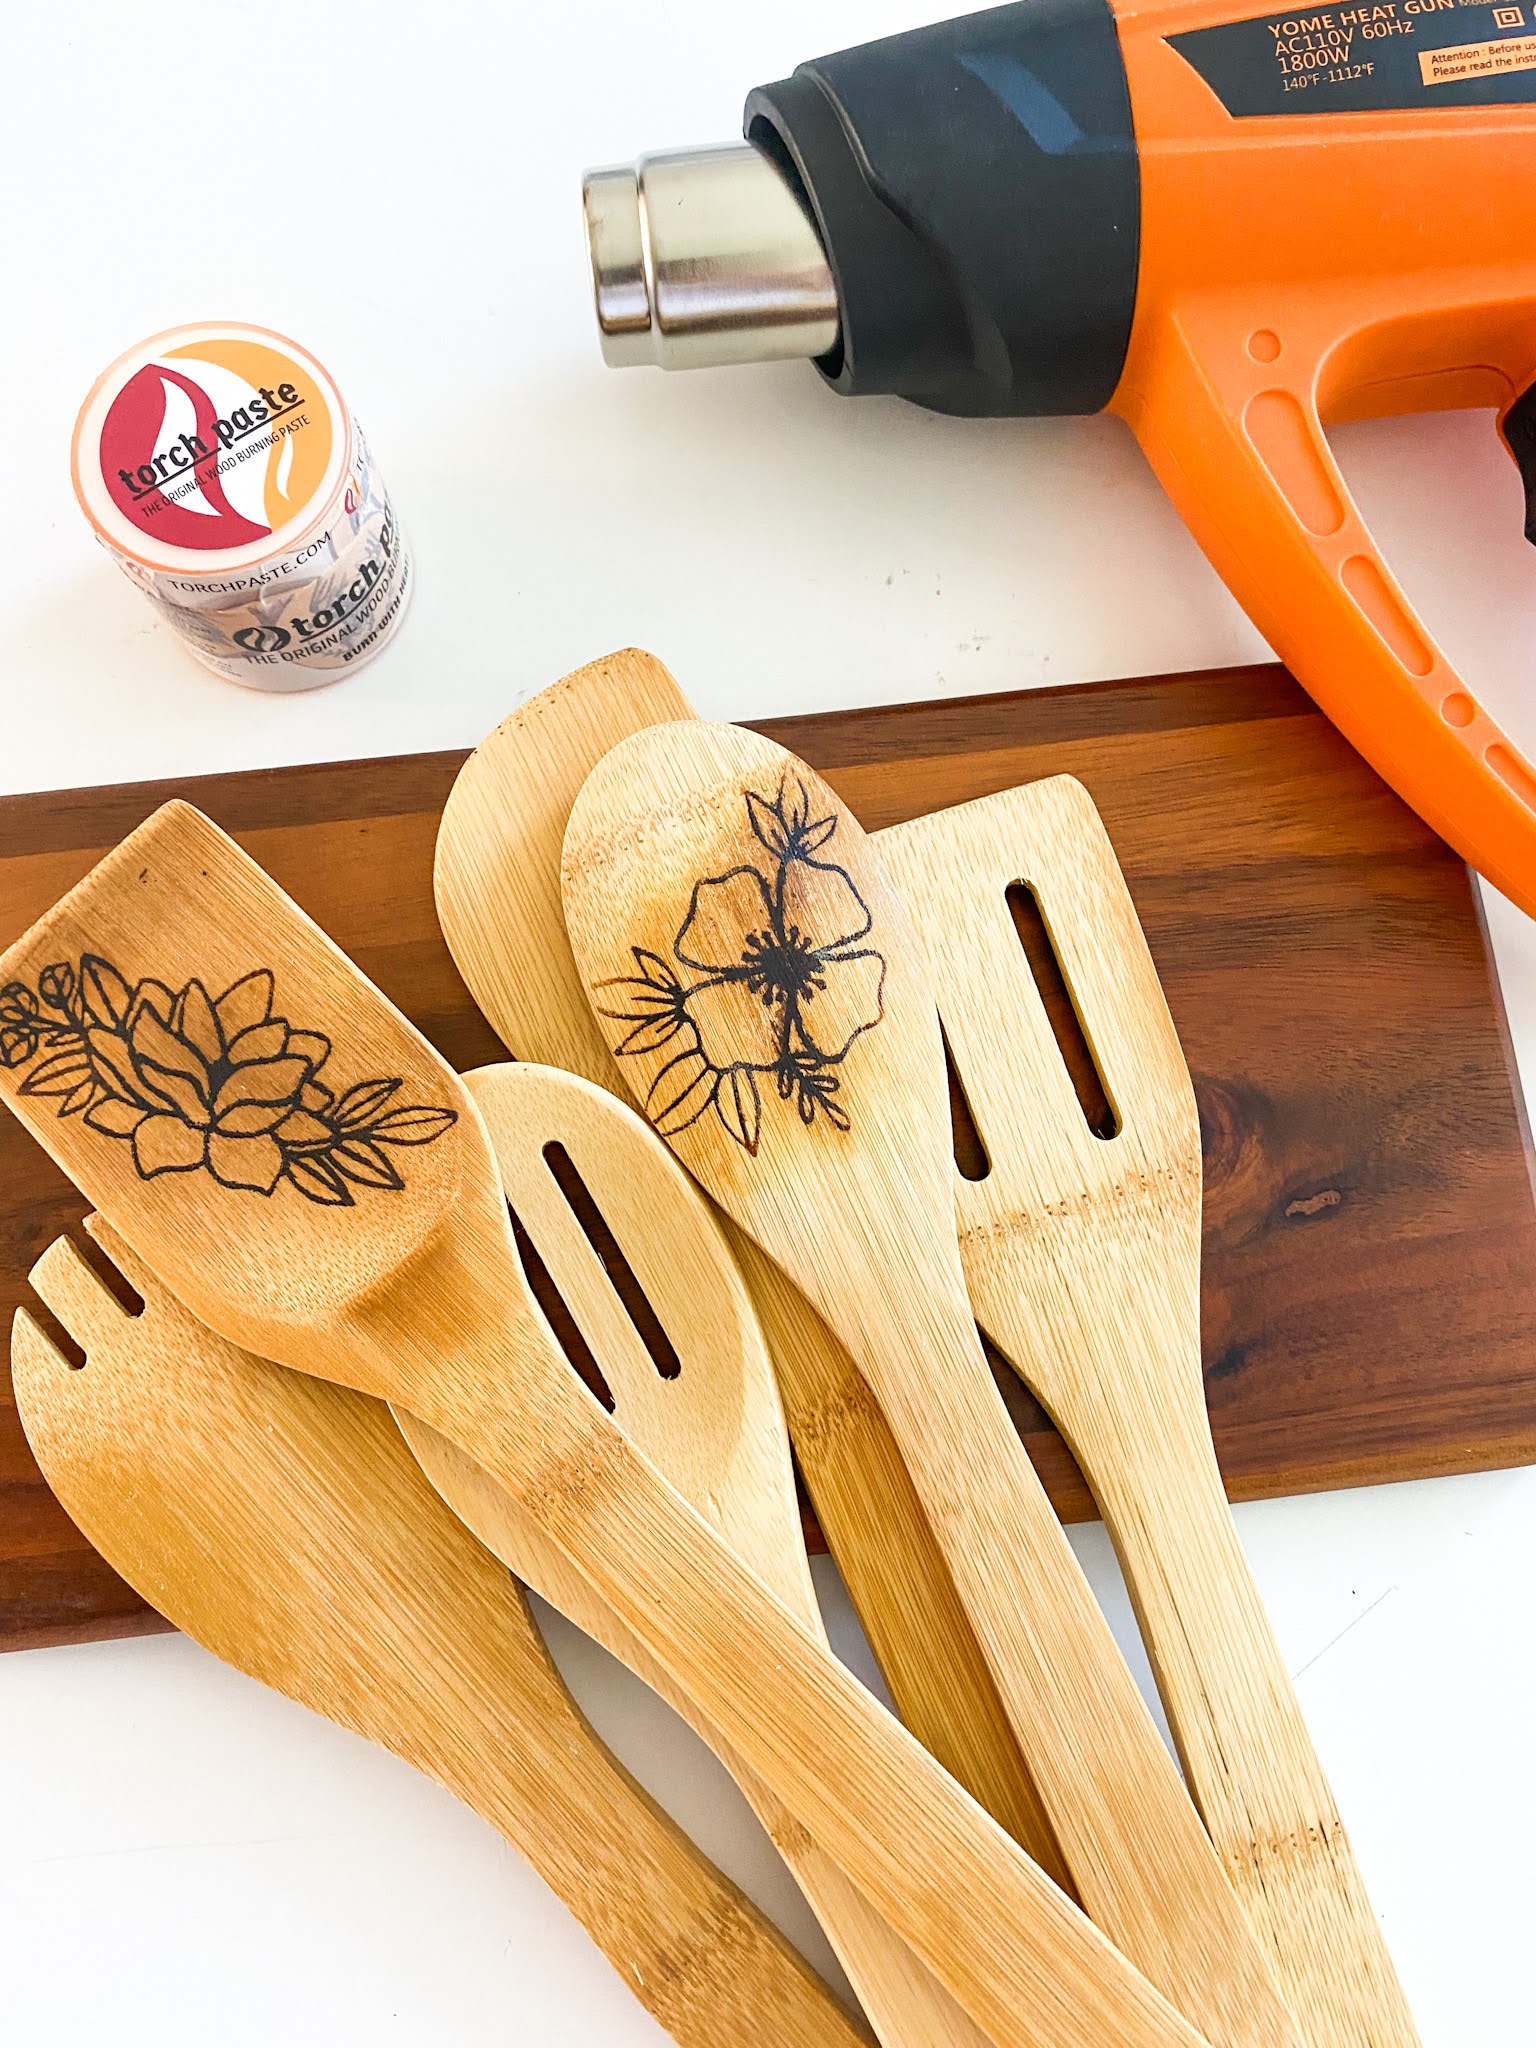 How to Wood Burn Wooden Spoons (and Make Them Food Safe